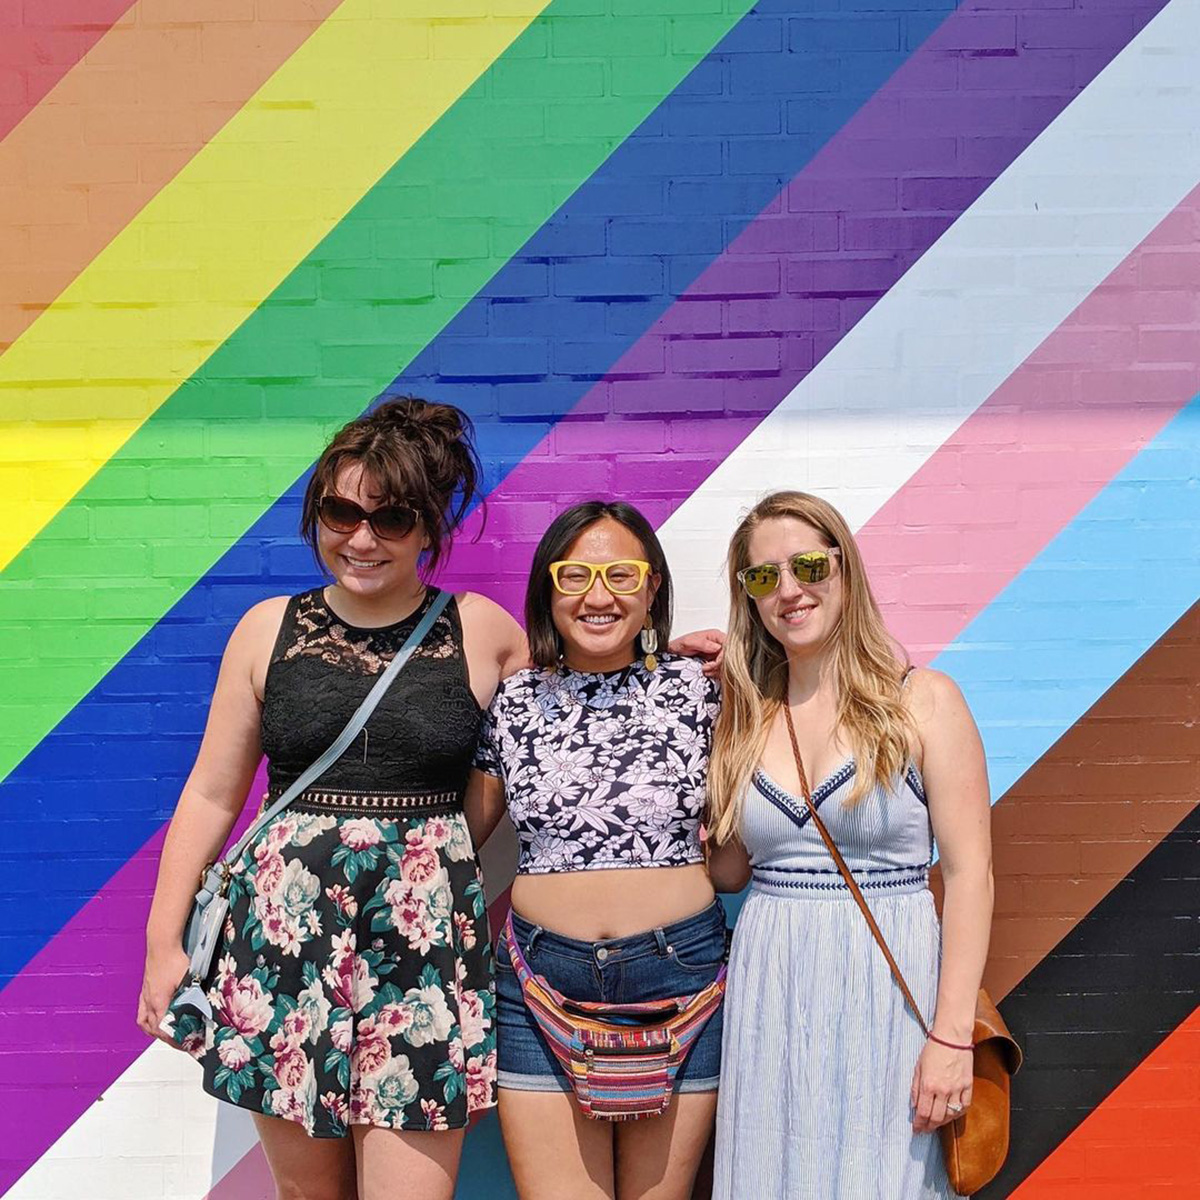 Instagrammable Walls of Edmonton - Explore Edmonton - Murals - Walls - Old Strathcona Whyte Ave TD Bank Pride Wall